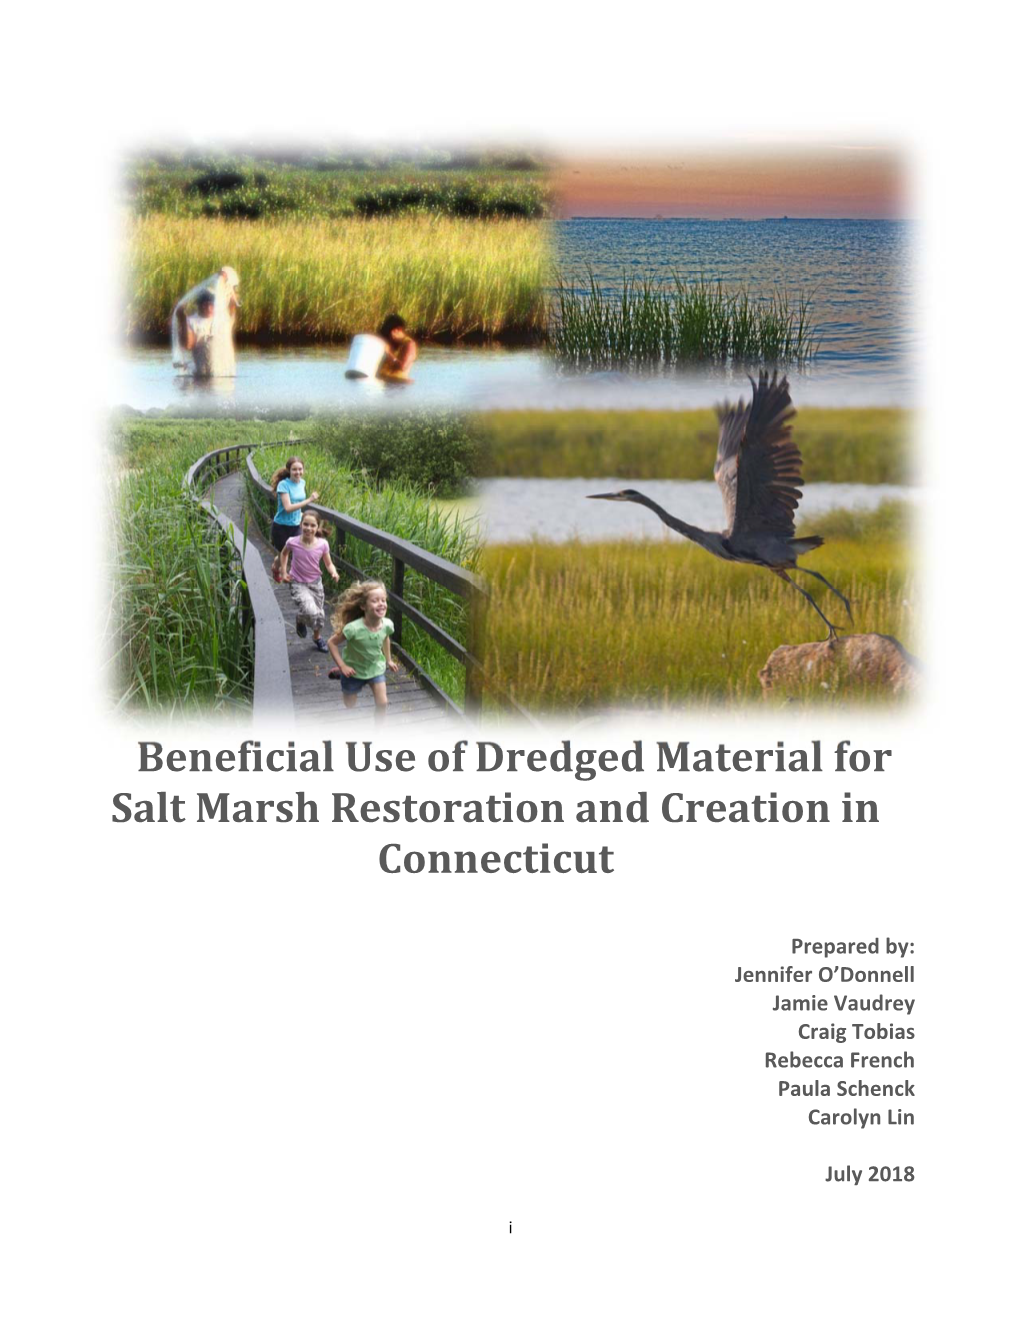 Beneficial Use of Dredged Material for Salt Marsh Restoration and Creation in Connecticut